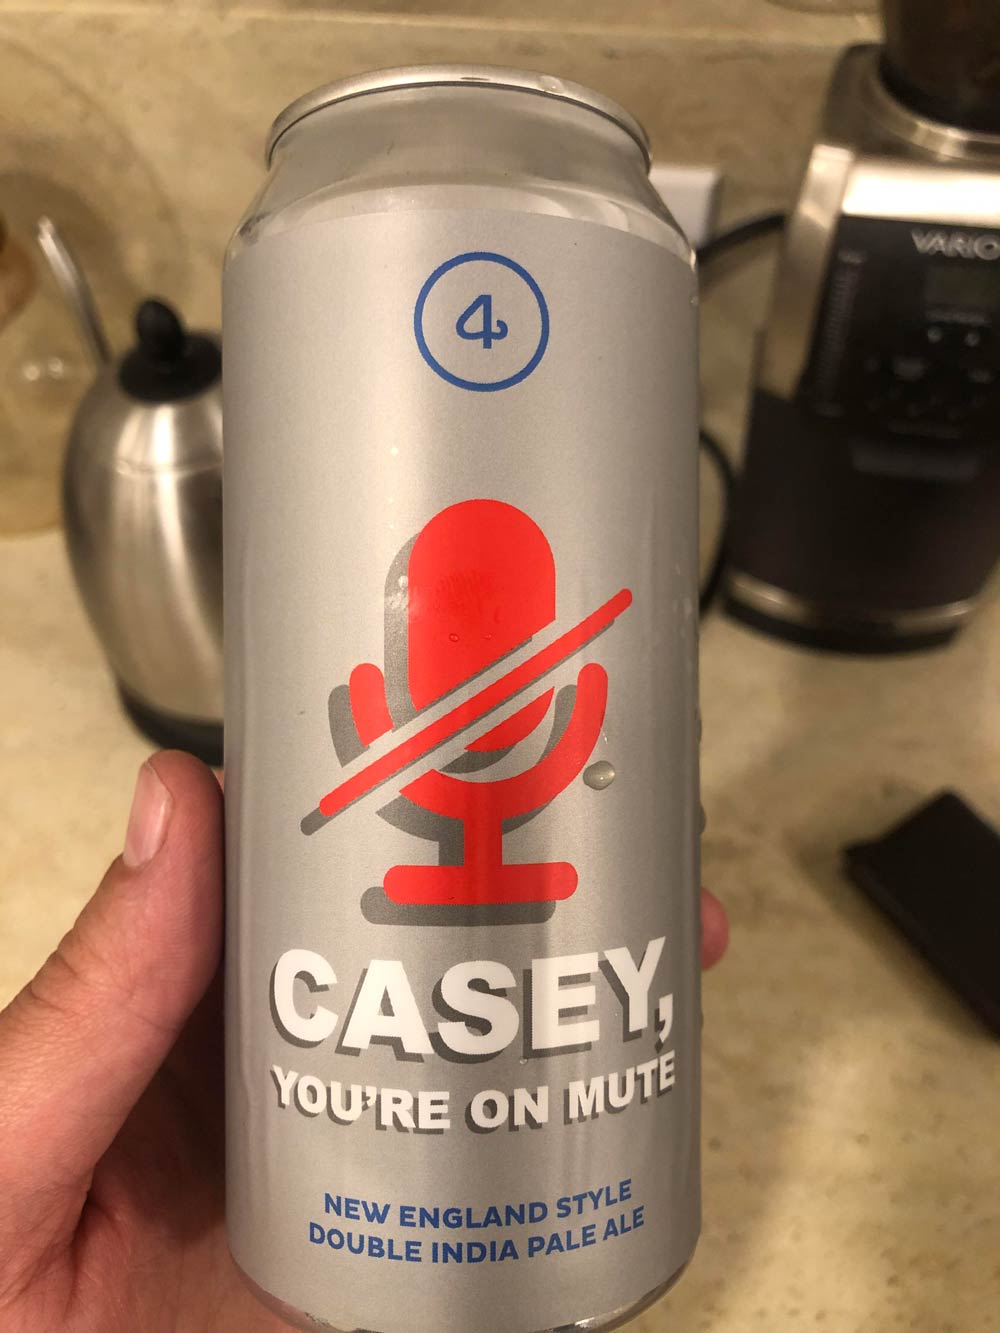 The beer I’m drinking tonight understands the 2020 struggle